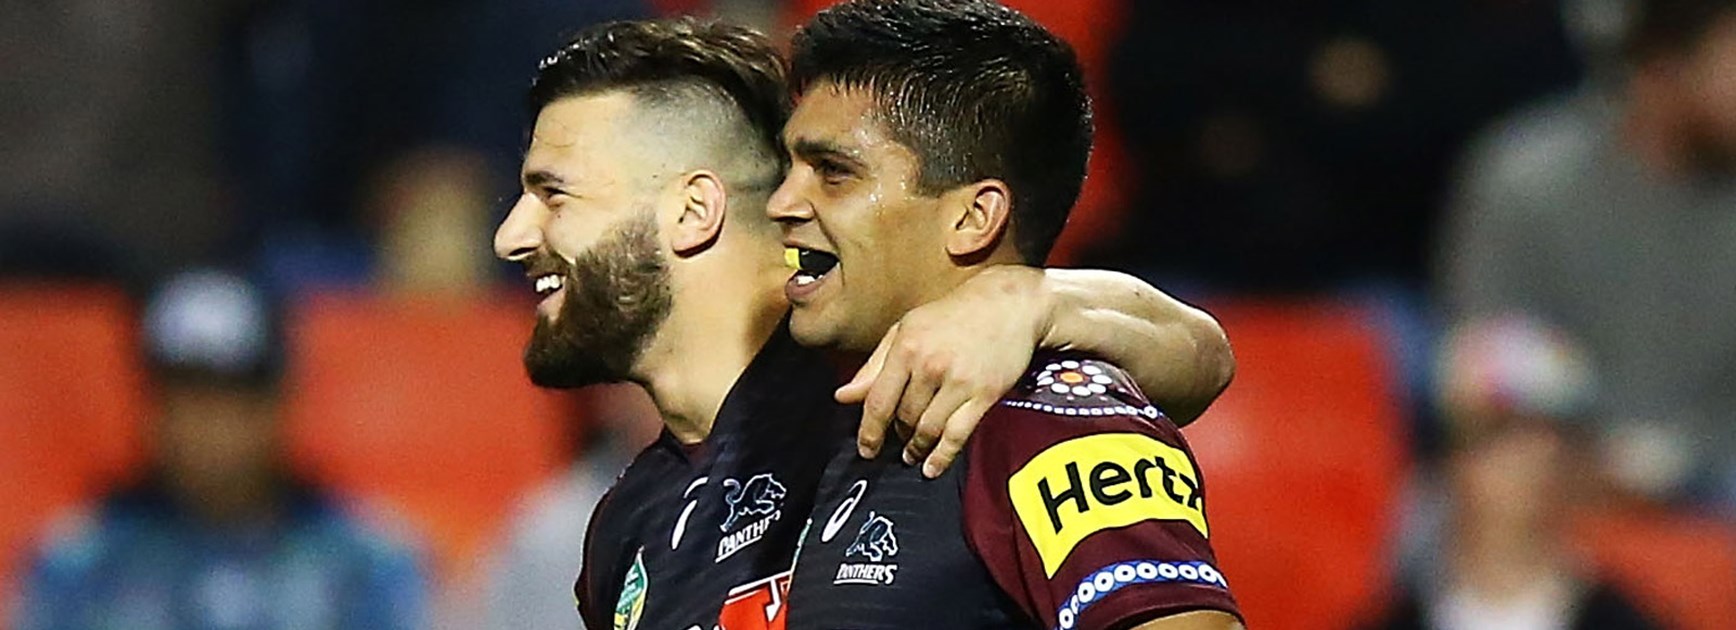 Tyrone Peachey was at his attacking best against the Warriors in Round 23.